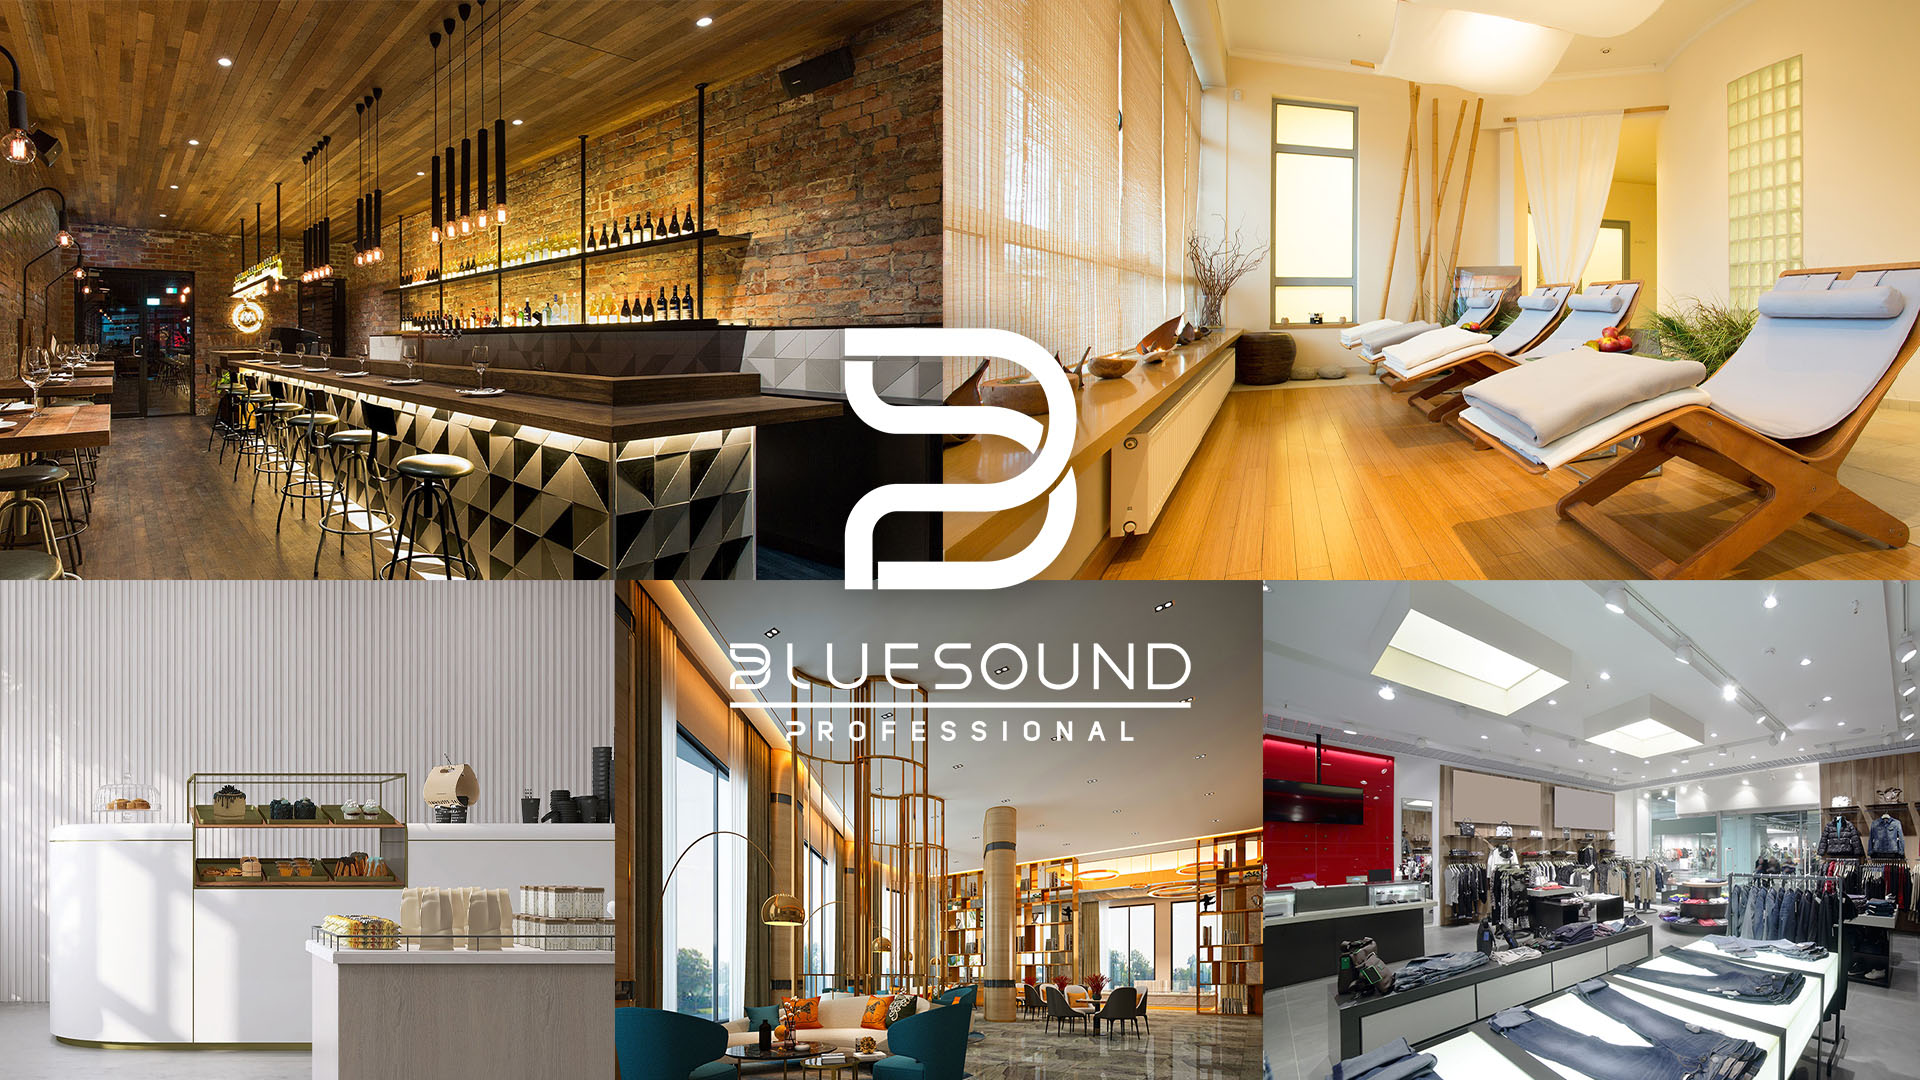 Collage images of Bluesound professional equipments installed in various business setting